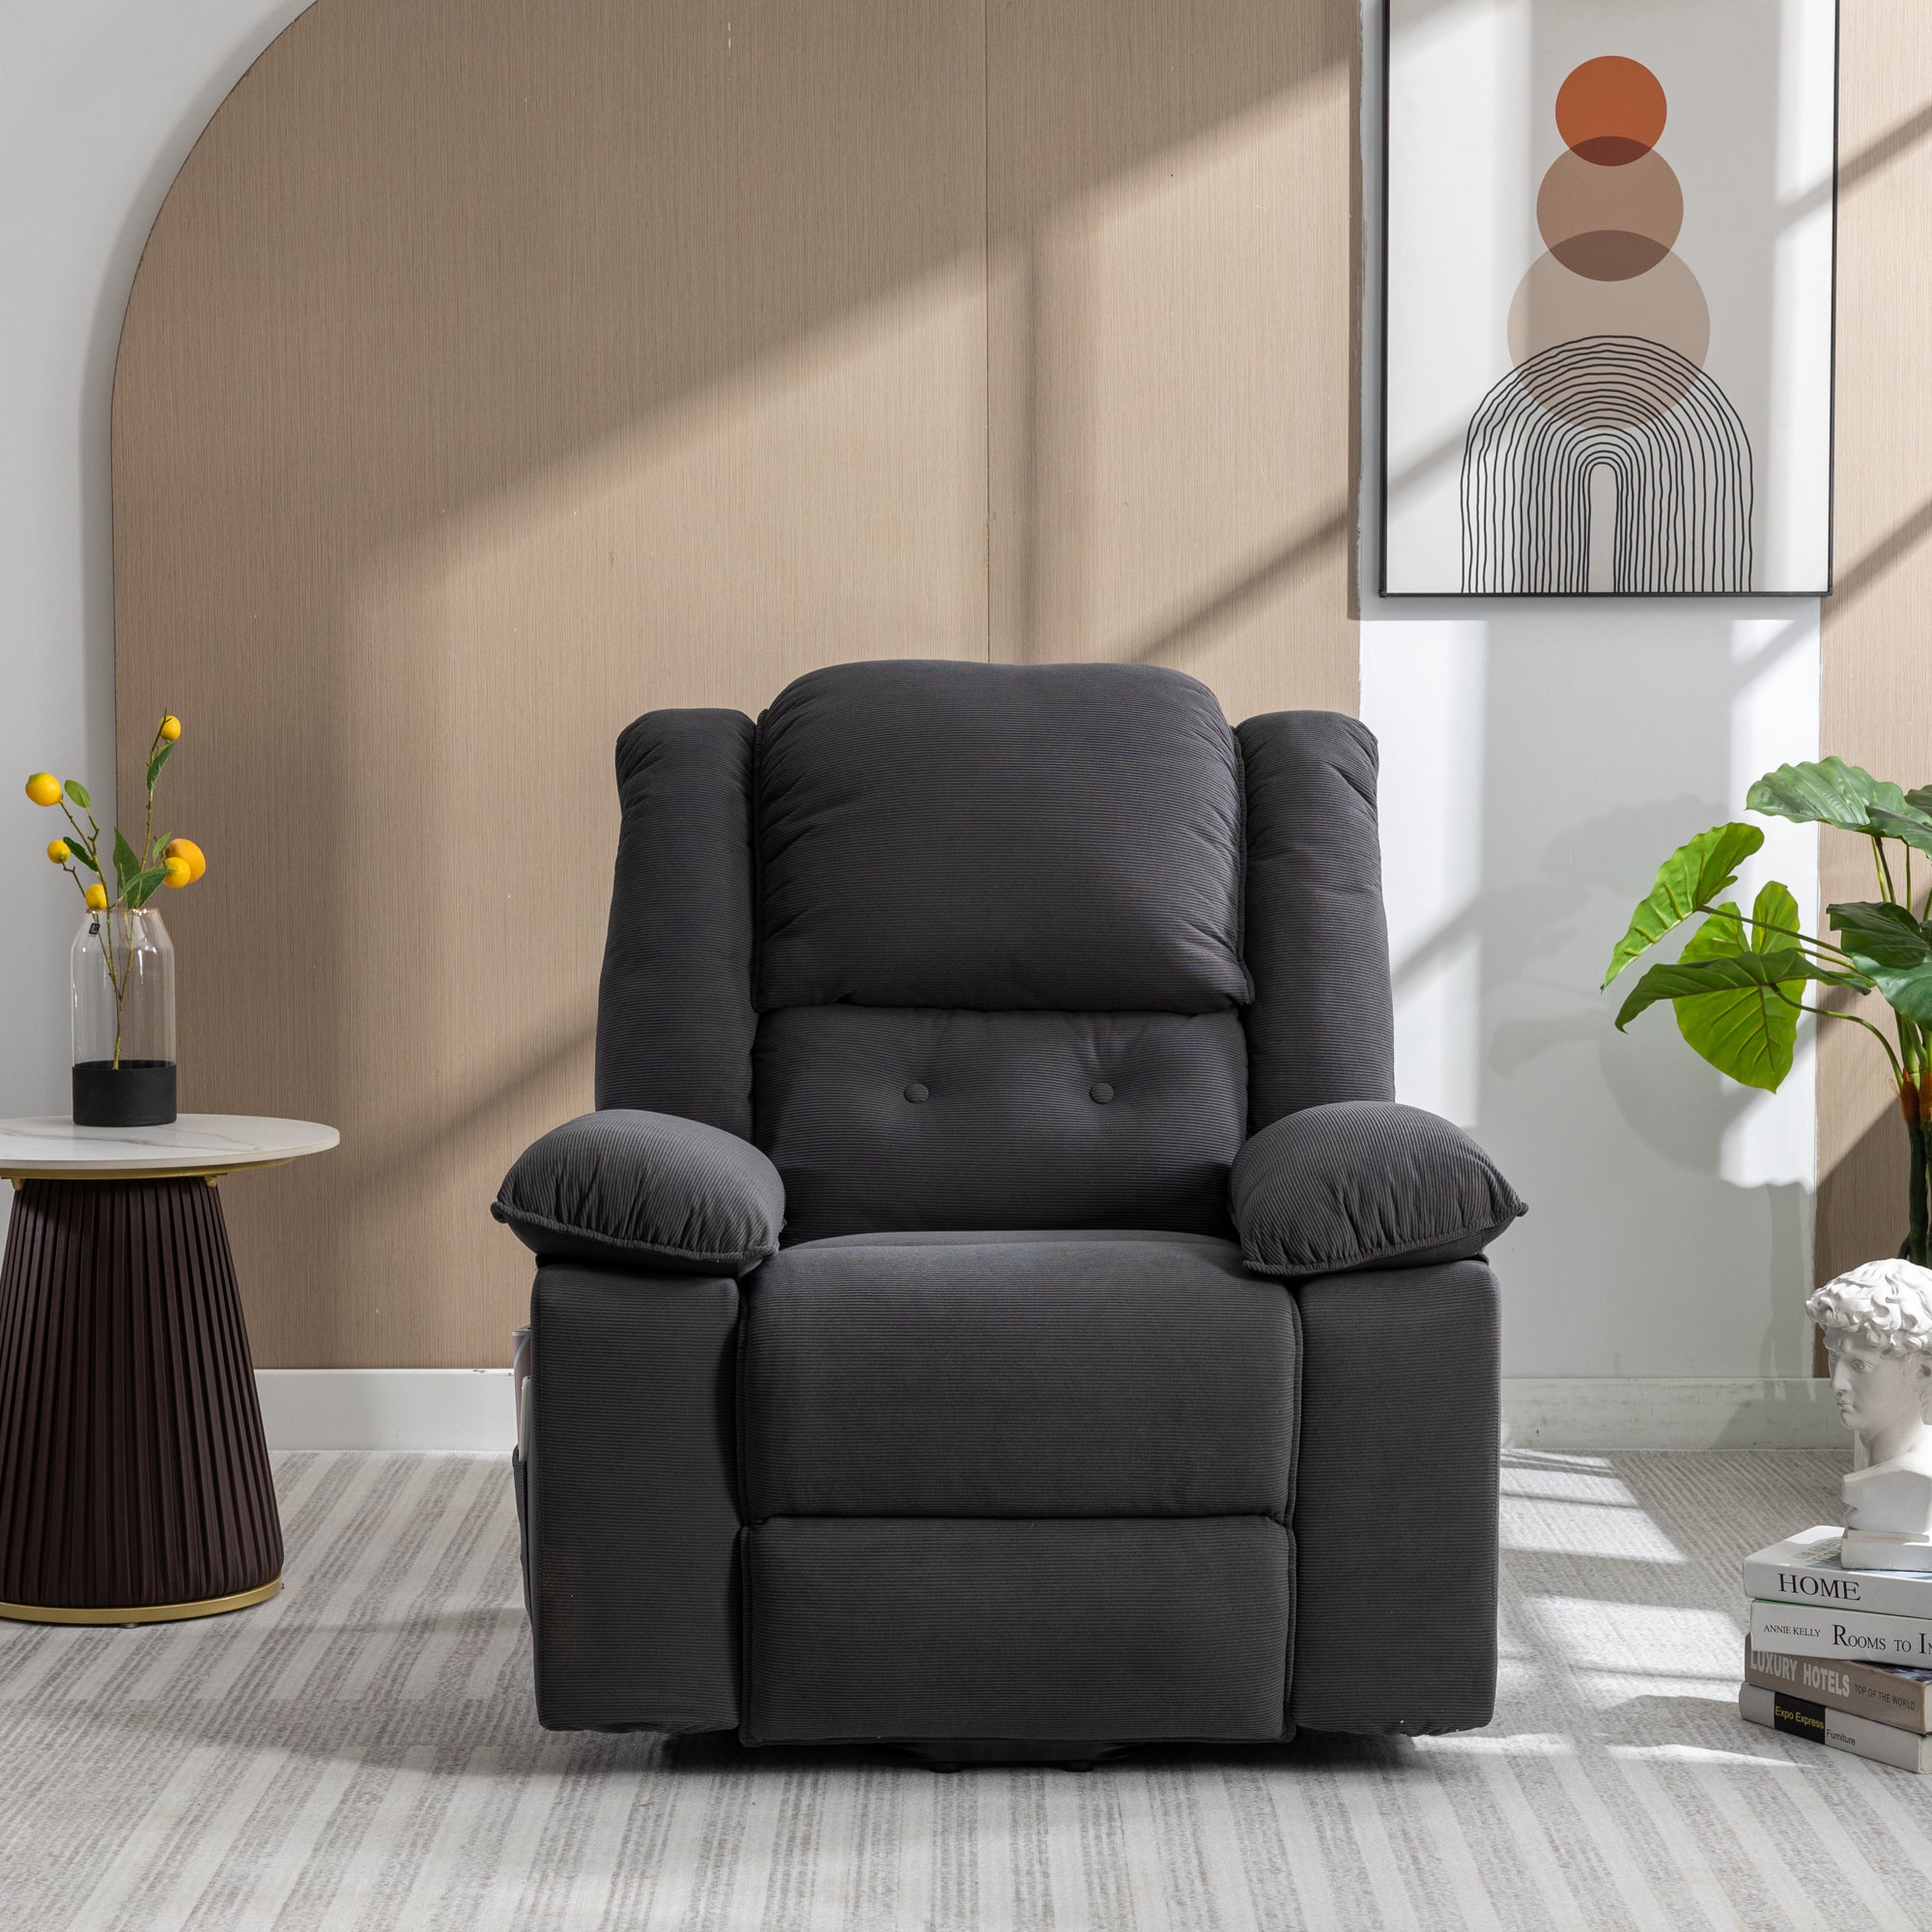 Gray Power Lift Chair Front Profile in sitting room